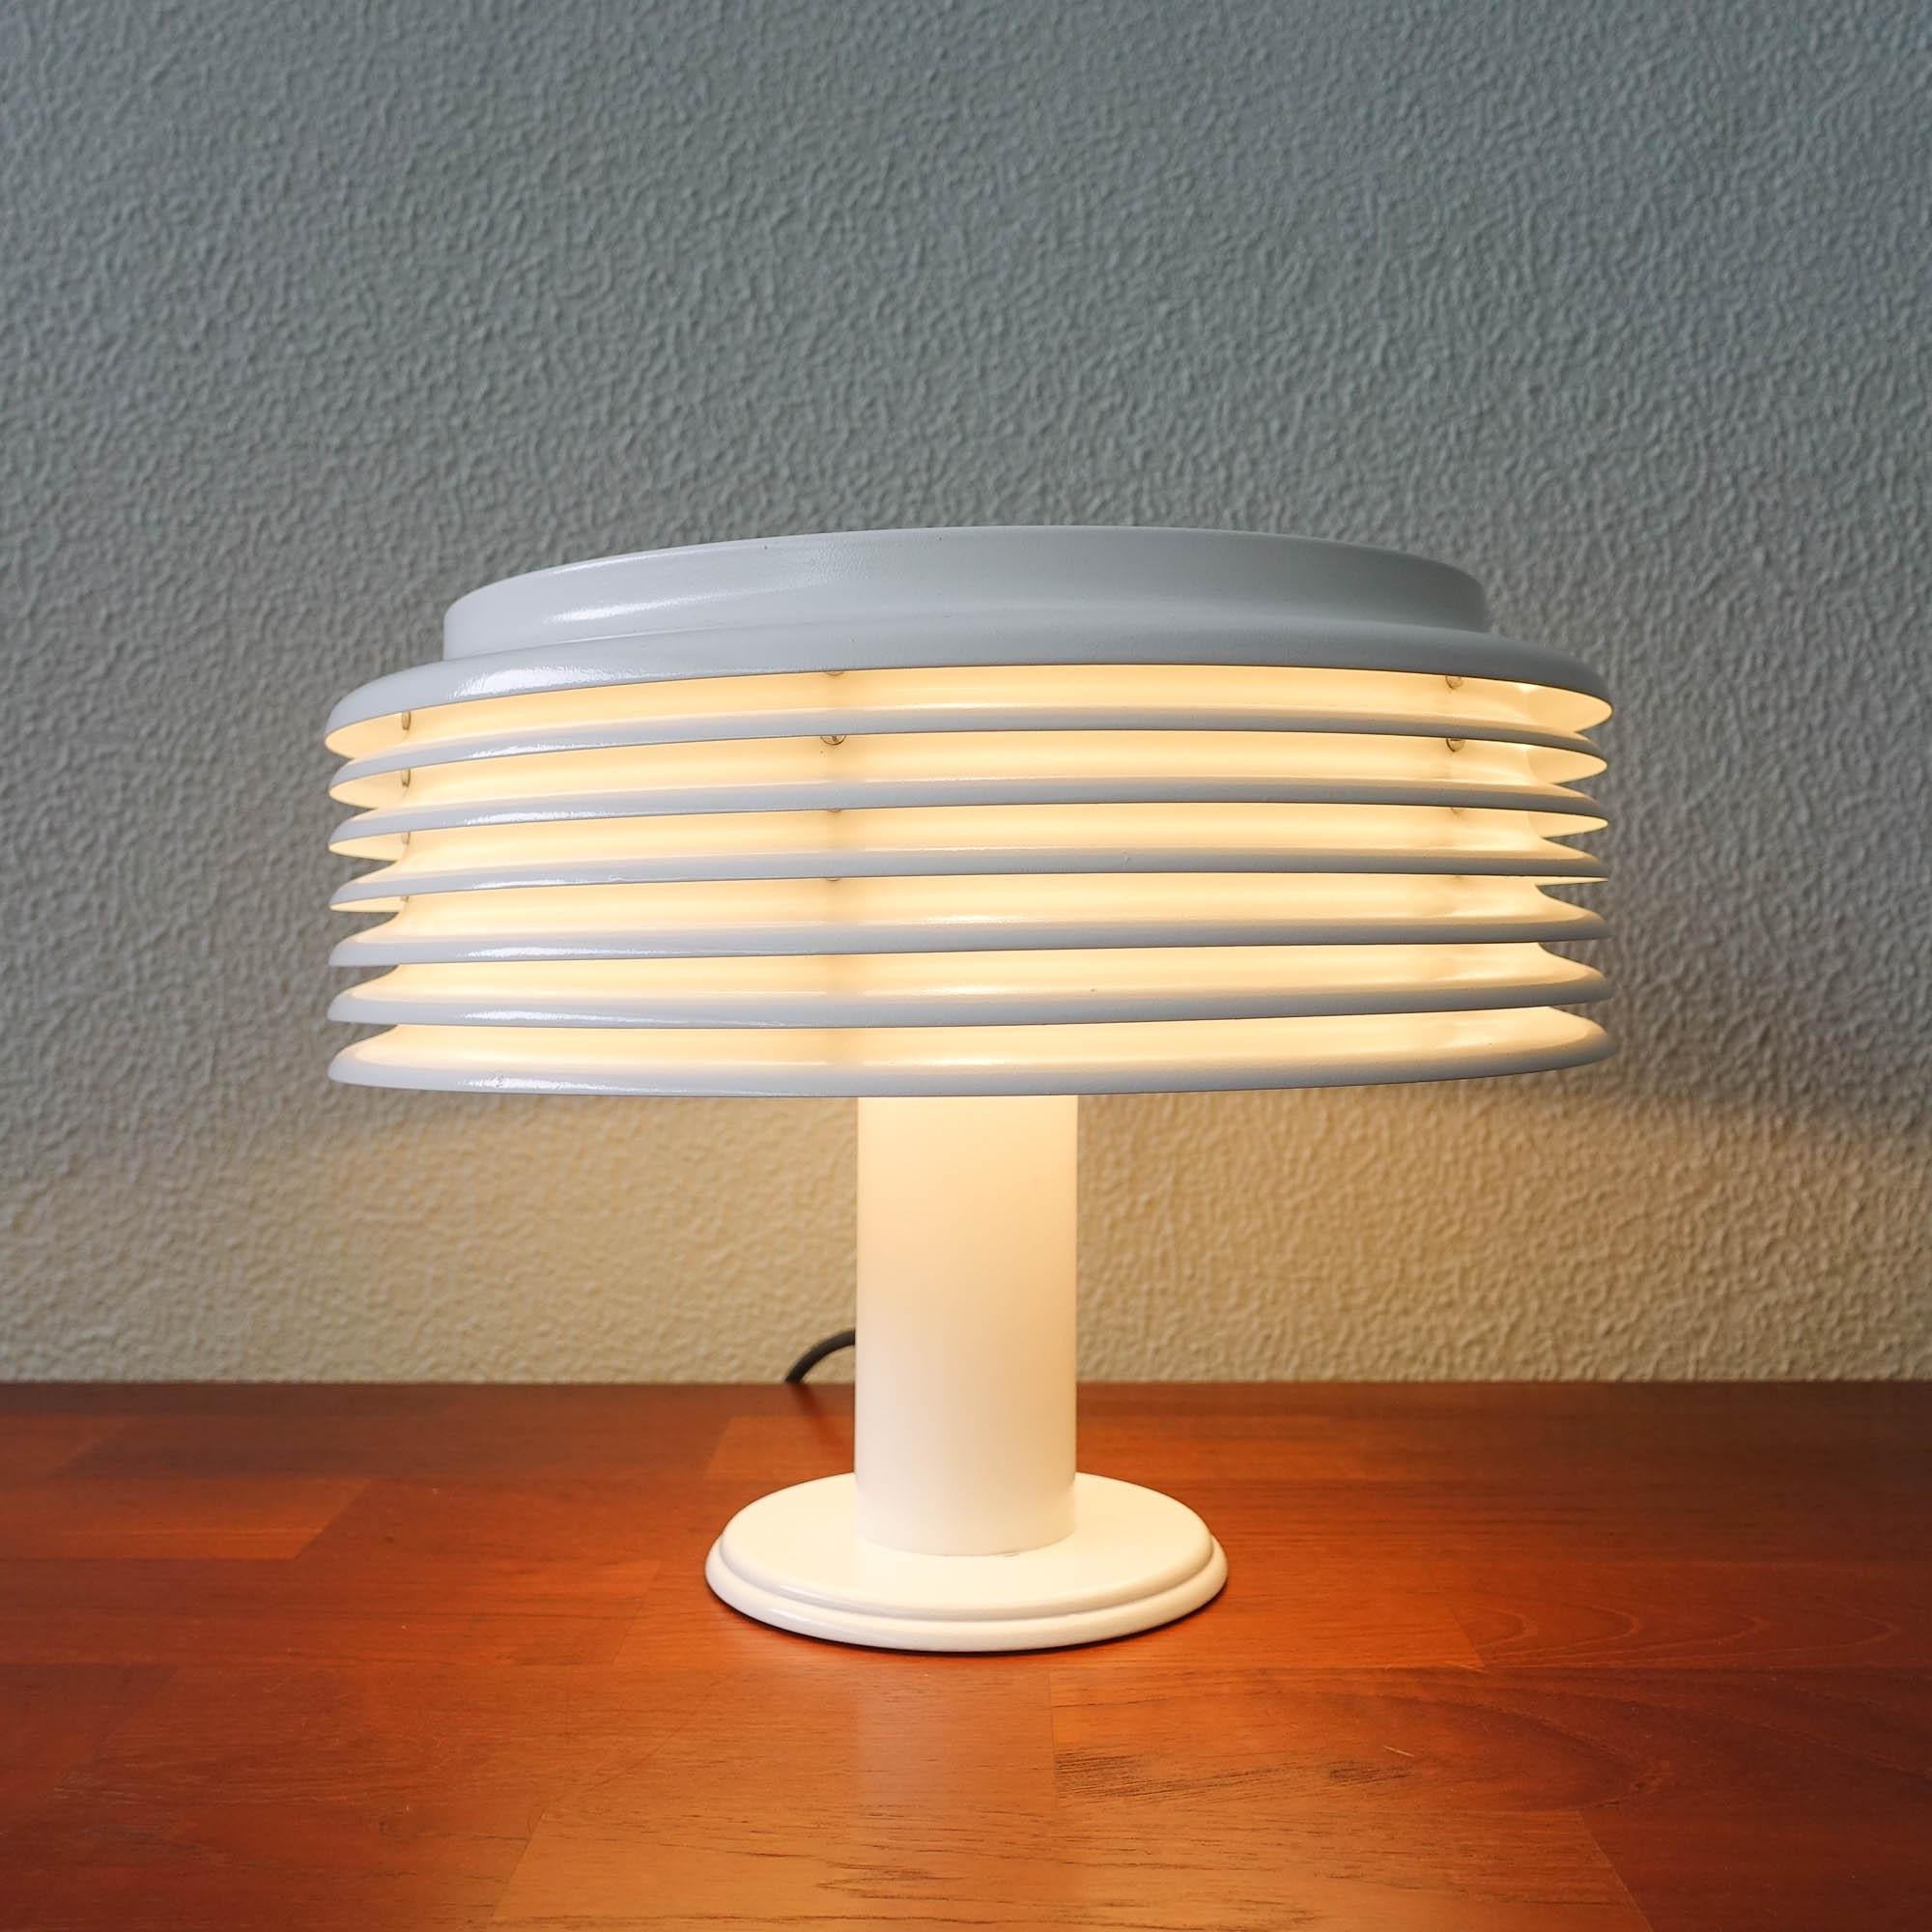 This table lamp was designed by Kazuo Motozawa for Staff, in Germany, during the 1970's. It features a white painted metal round base and tube. White mushroom lampshade made of slat rings. Round metal lid on top. When it's on , it emits an indirect